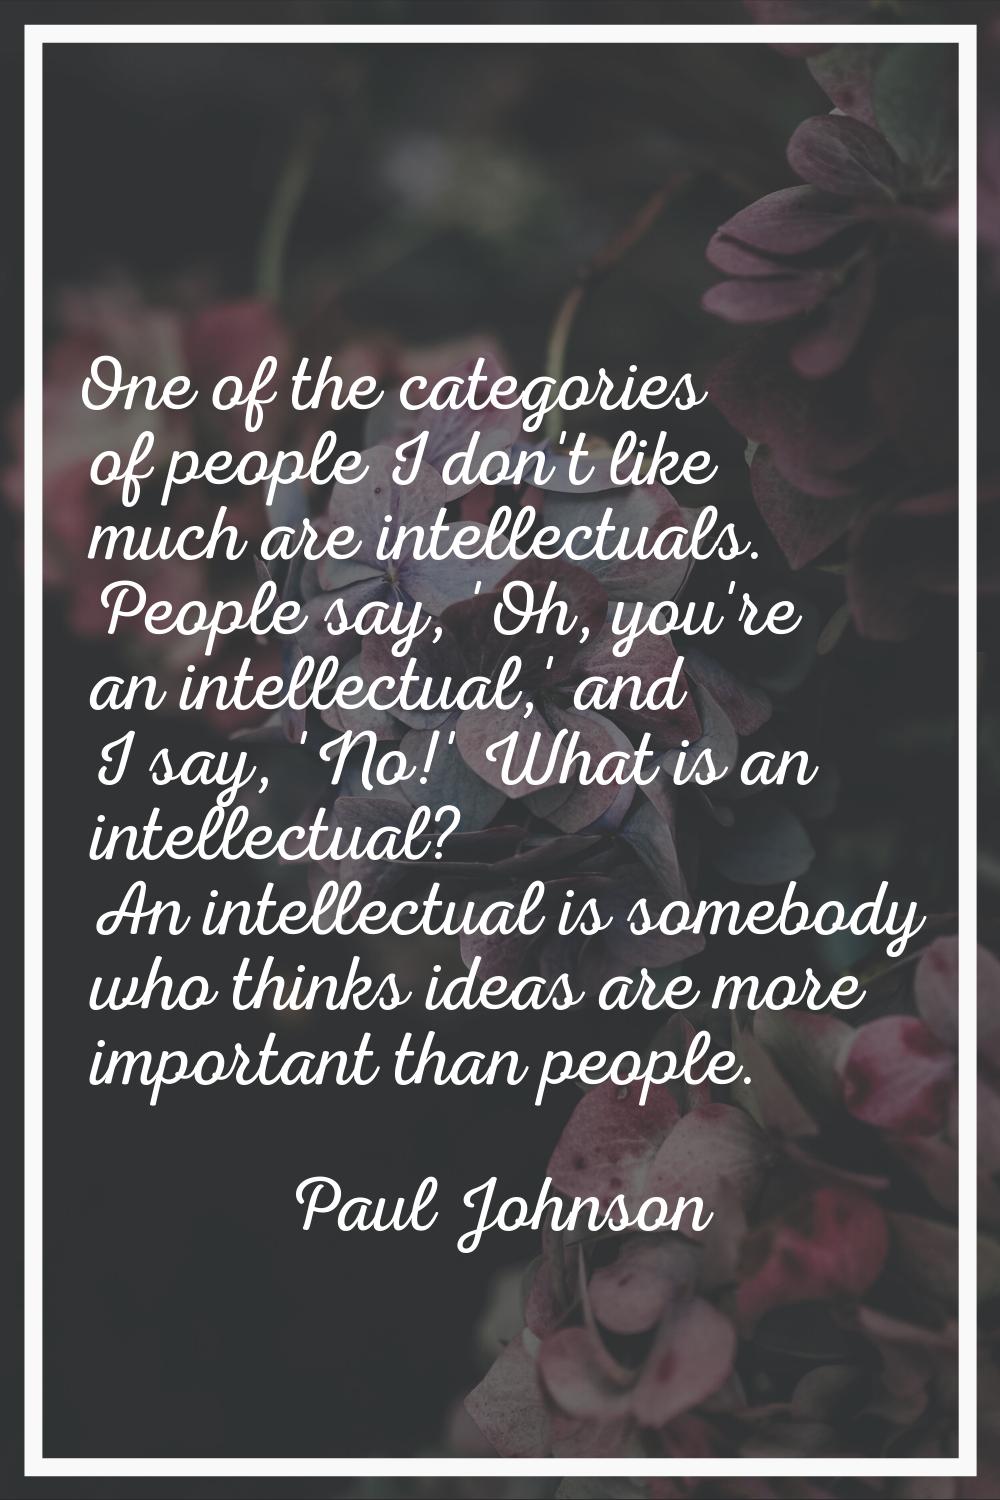 One of the categories of people I don't like much are intellectuals. People say, 'Oh, you're an int